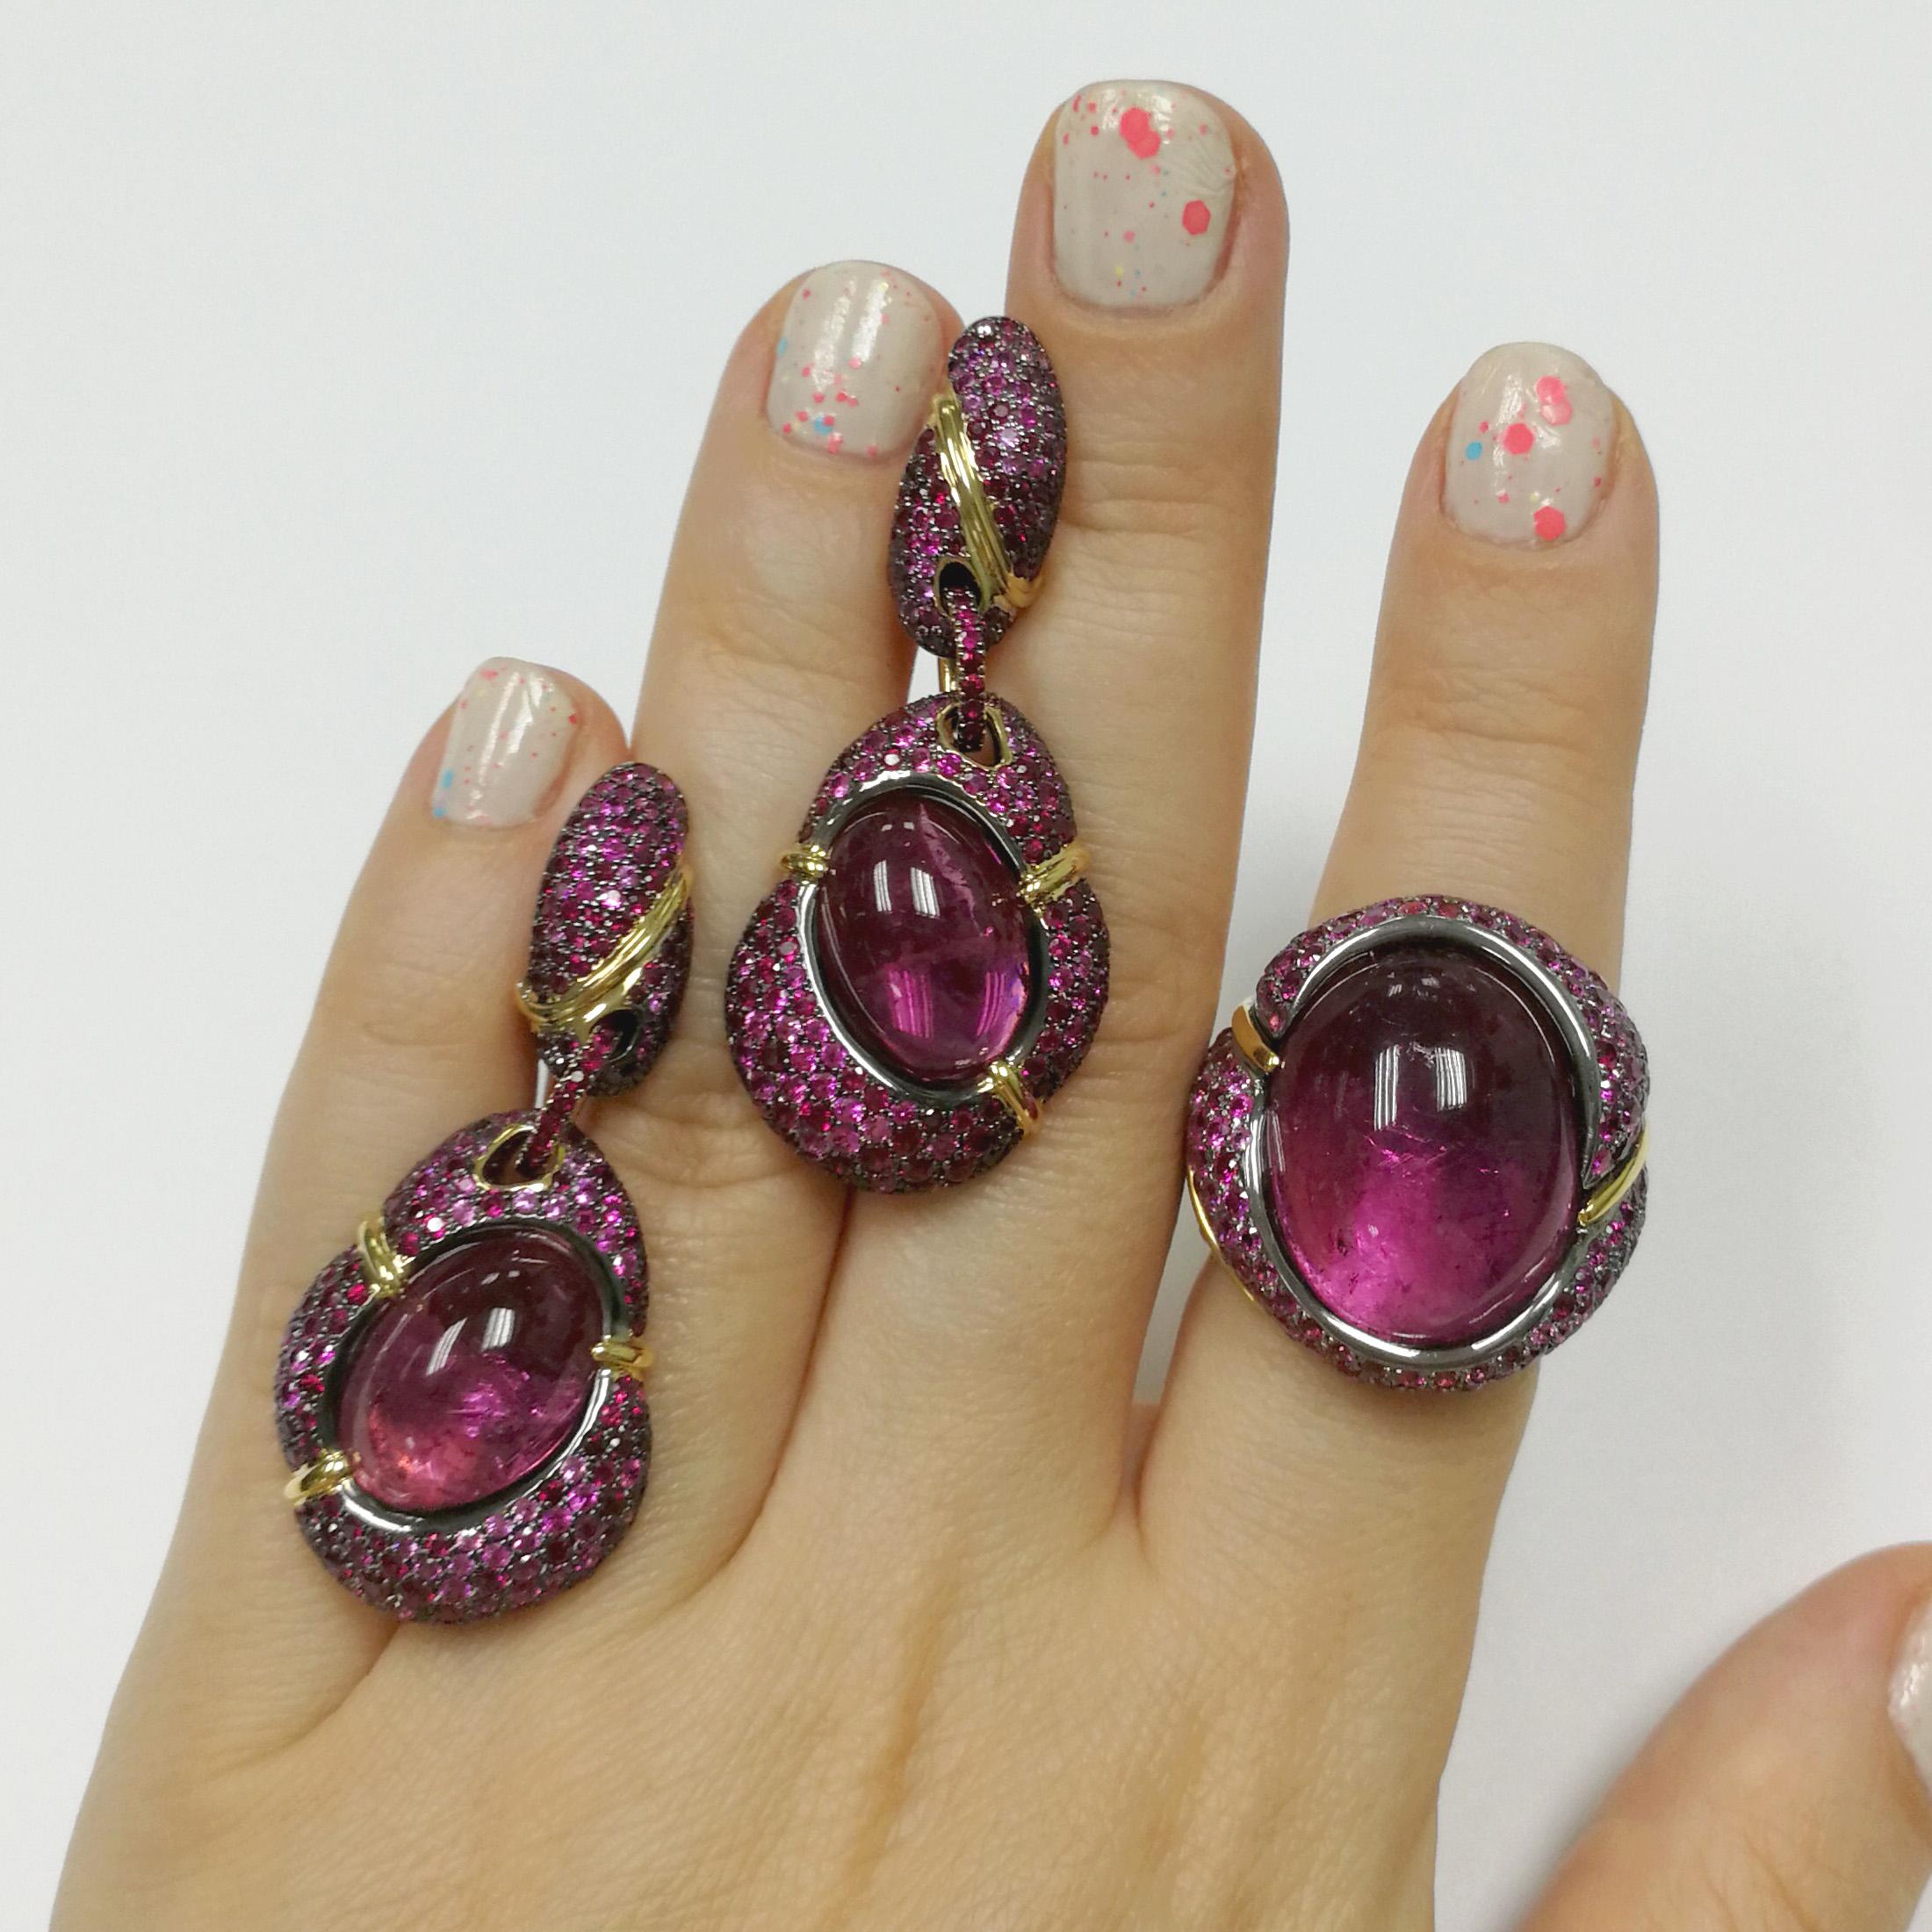 Pink Tourmaline Ruby Pink Sapphire 18 Karat Yellow Gold Suite
Absolutely spactacular Pink oval Cabochon shape Tourmalines in our Suite from 